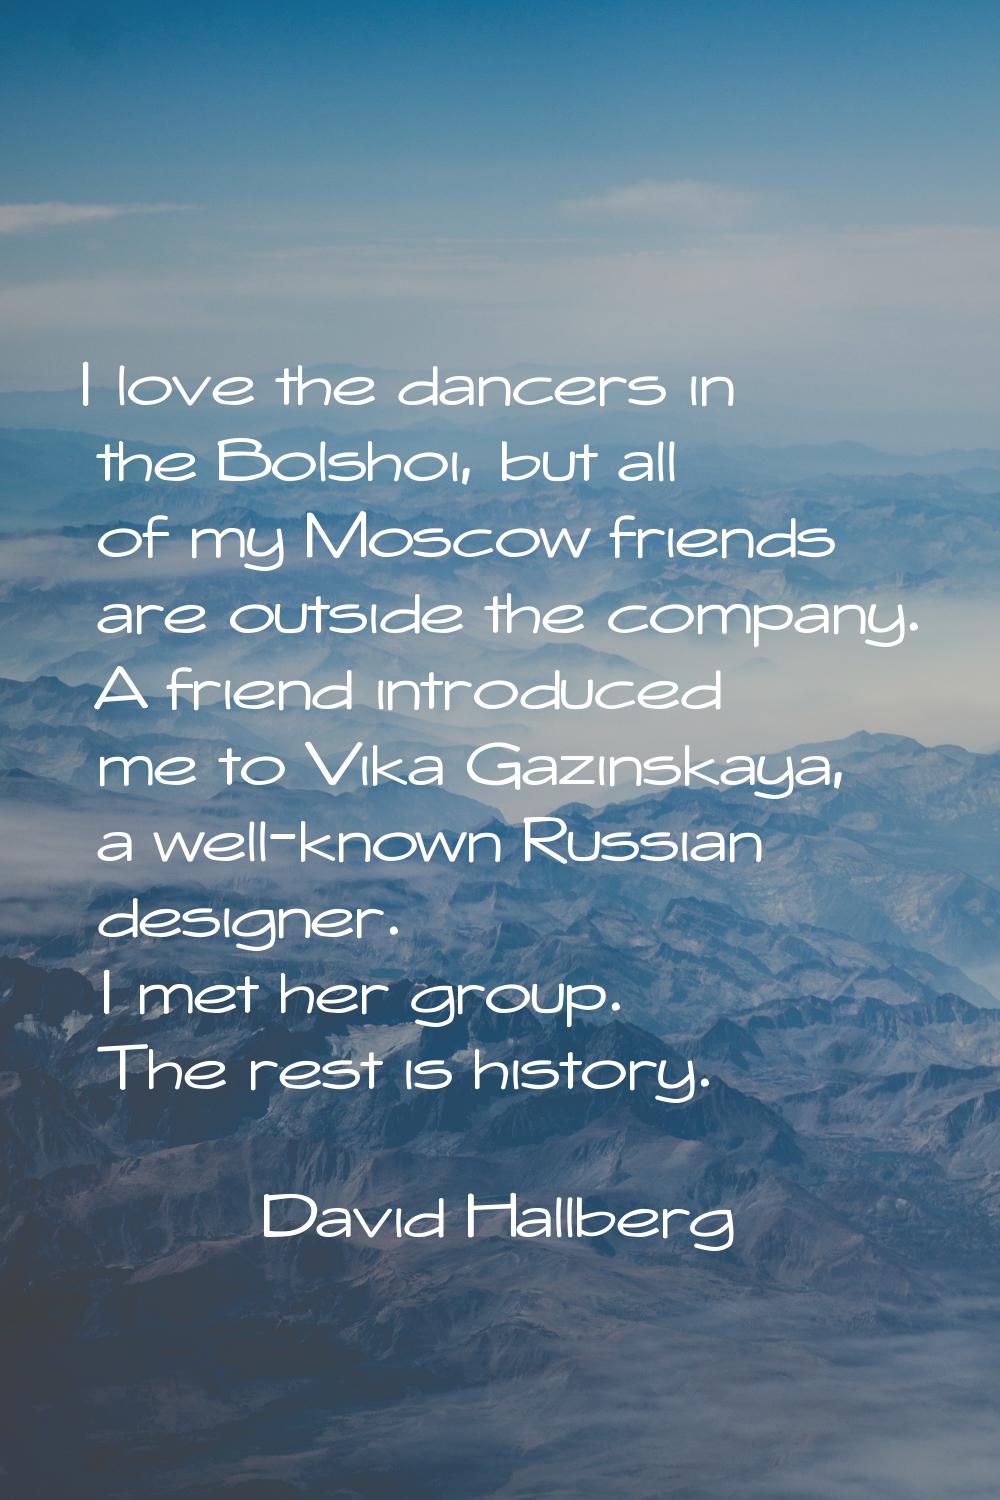 I love the dancers in the Bolshoi, but all of my Moscow friends are outside the company. A friend i